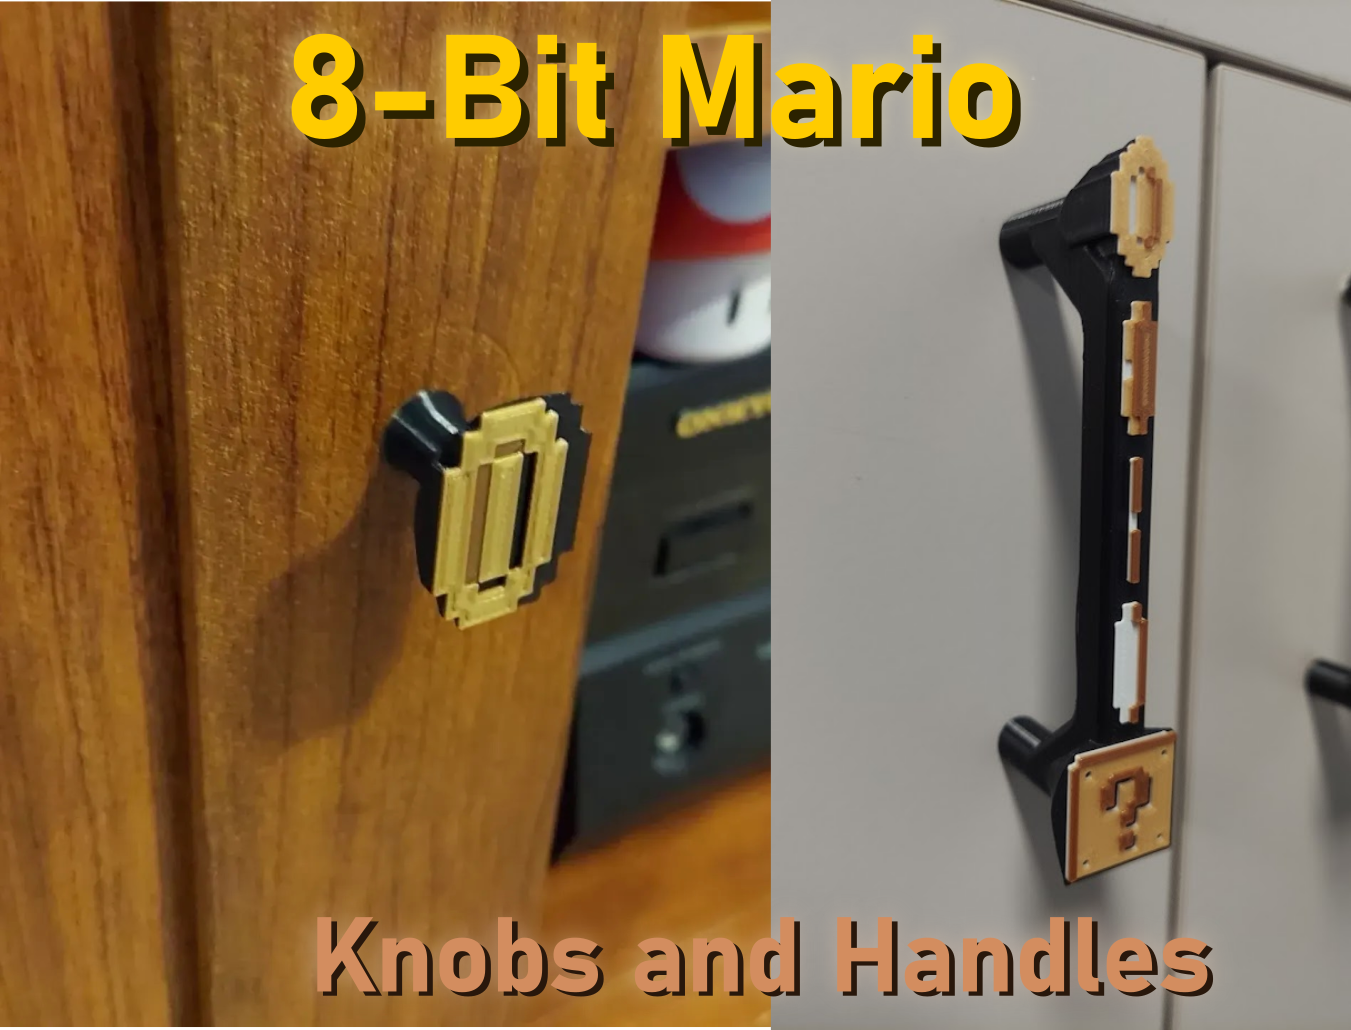 8-Bit Mario Cabinet Knobs and Handles